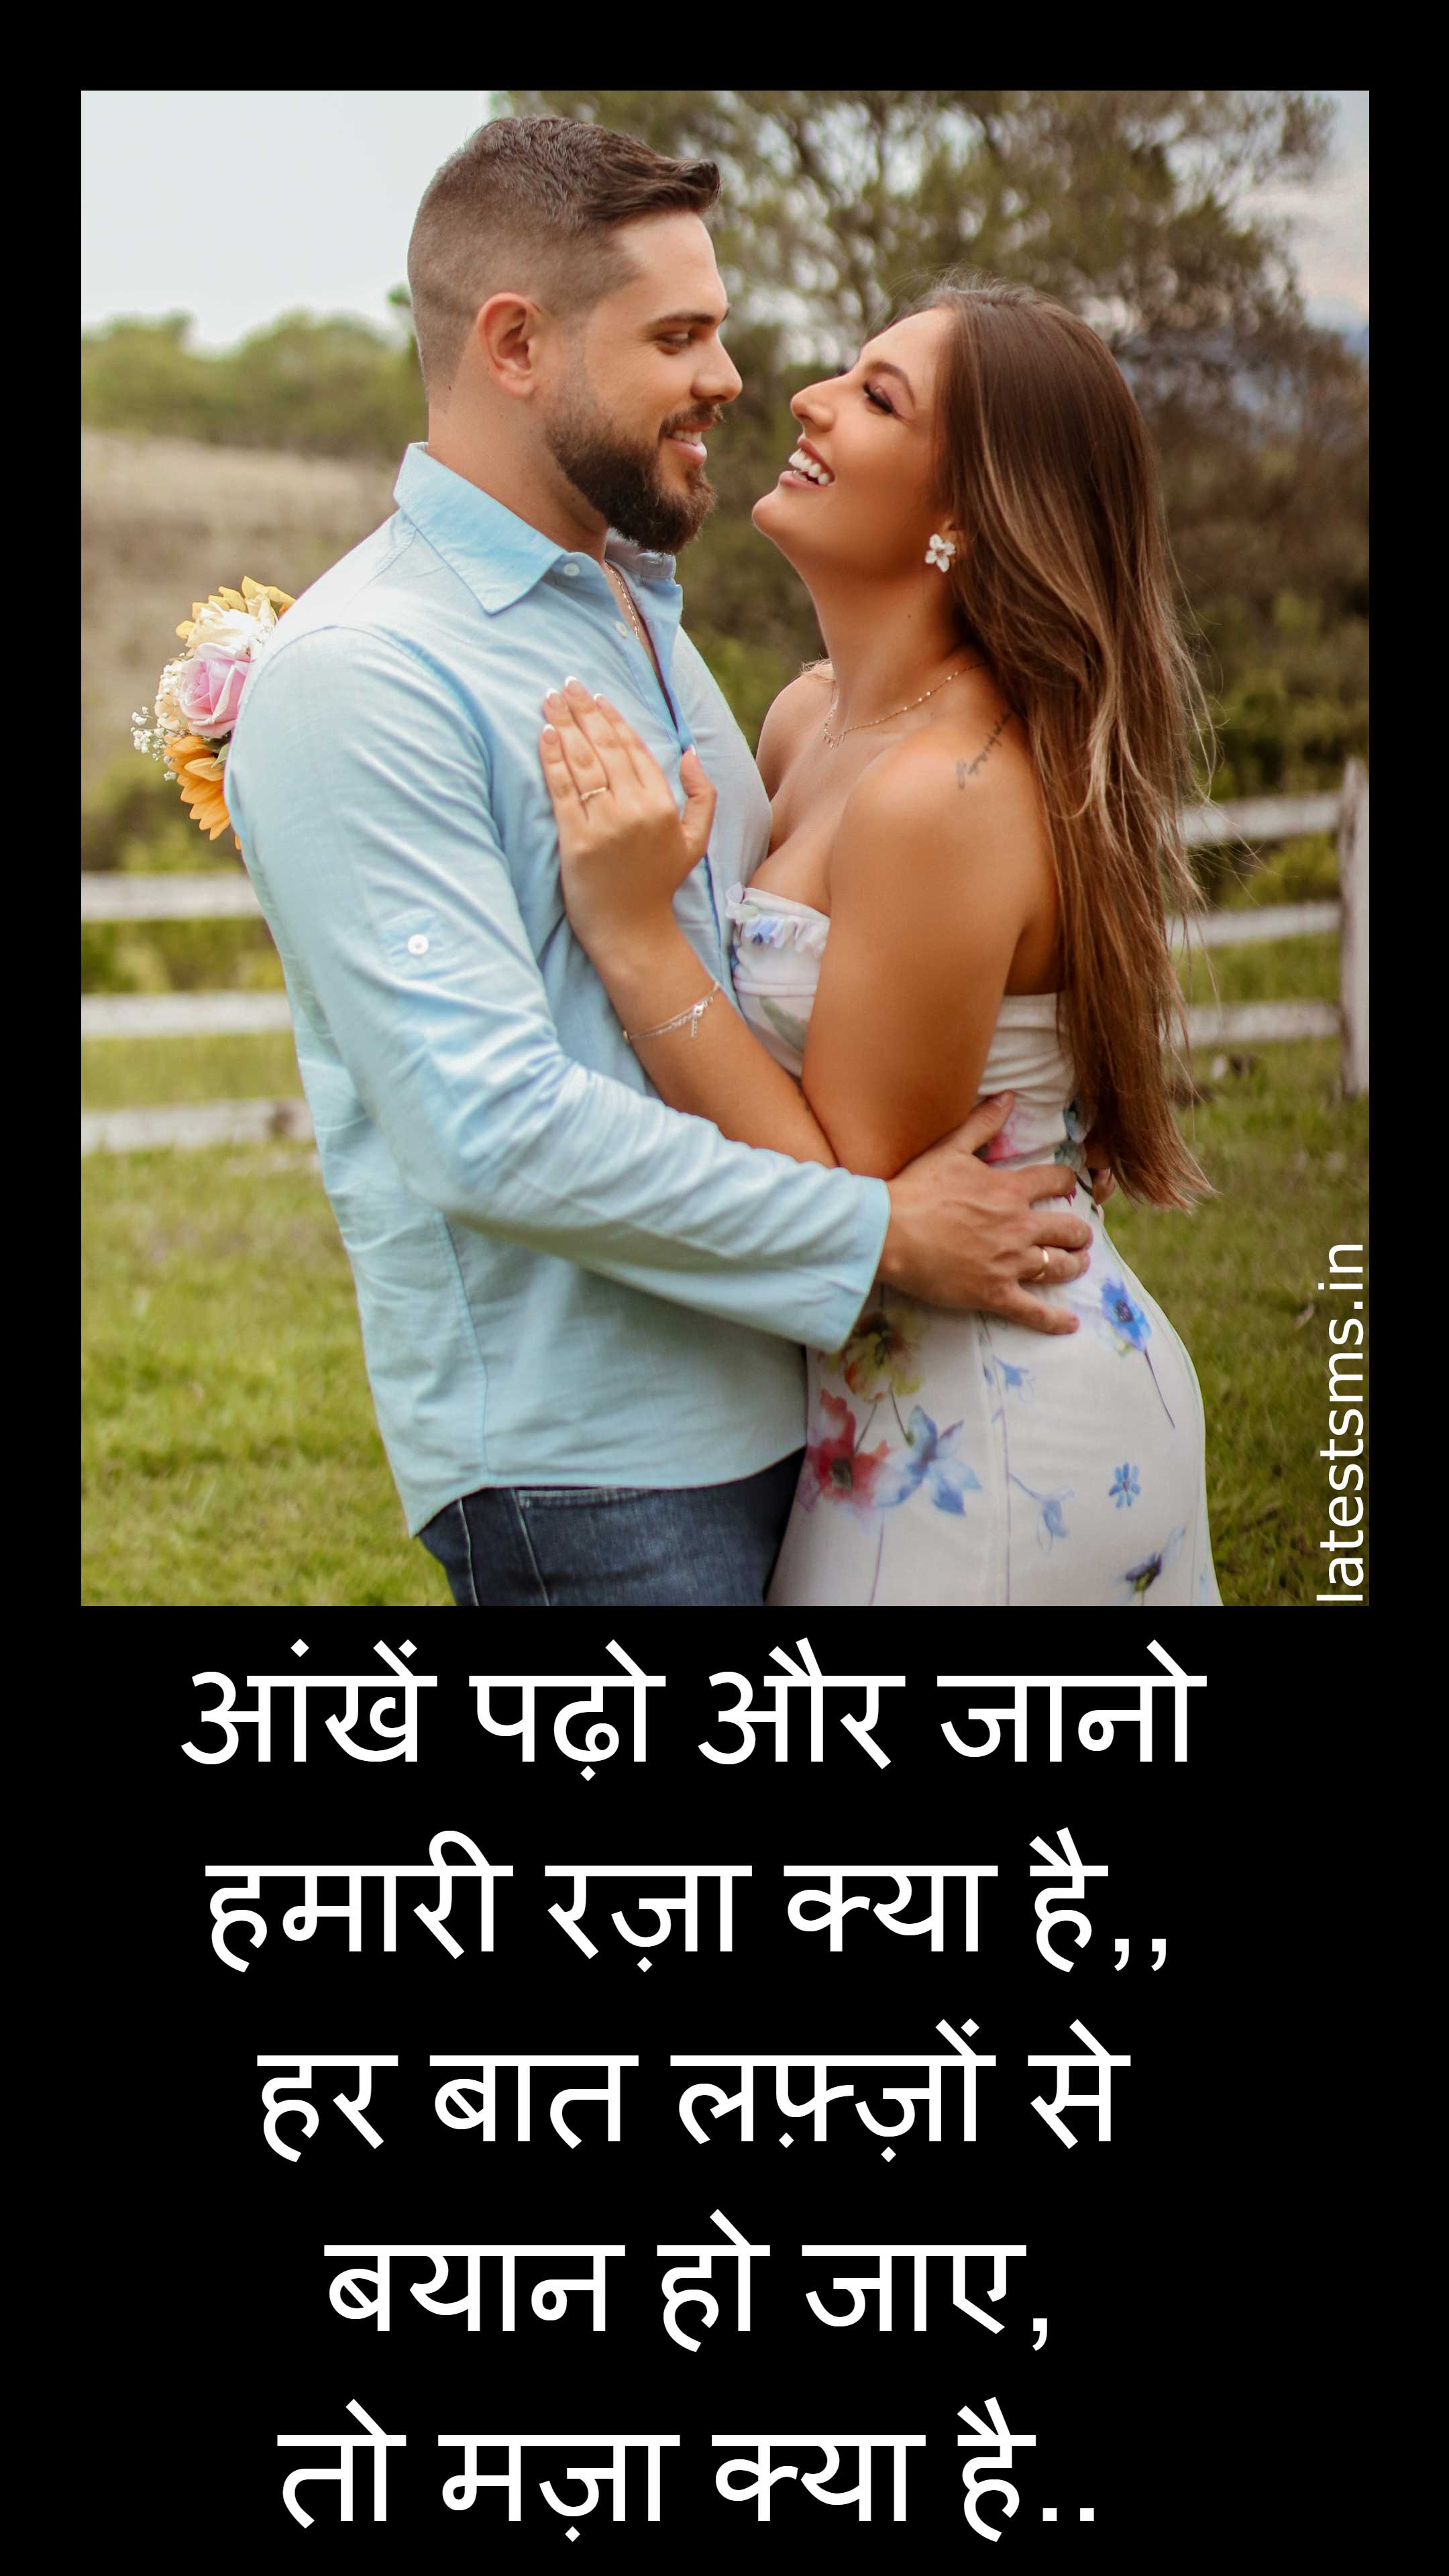 Romantic love messages for girlfriend in Hindi